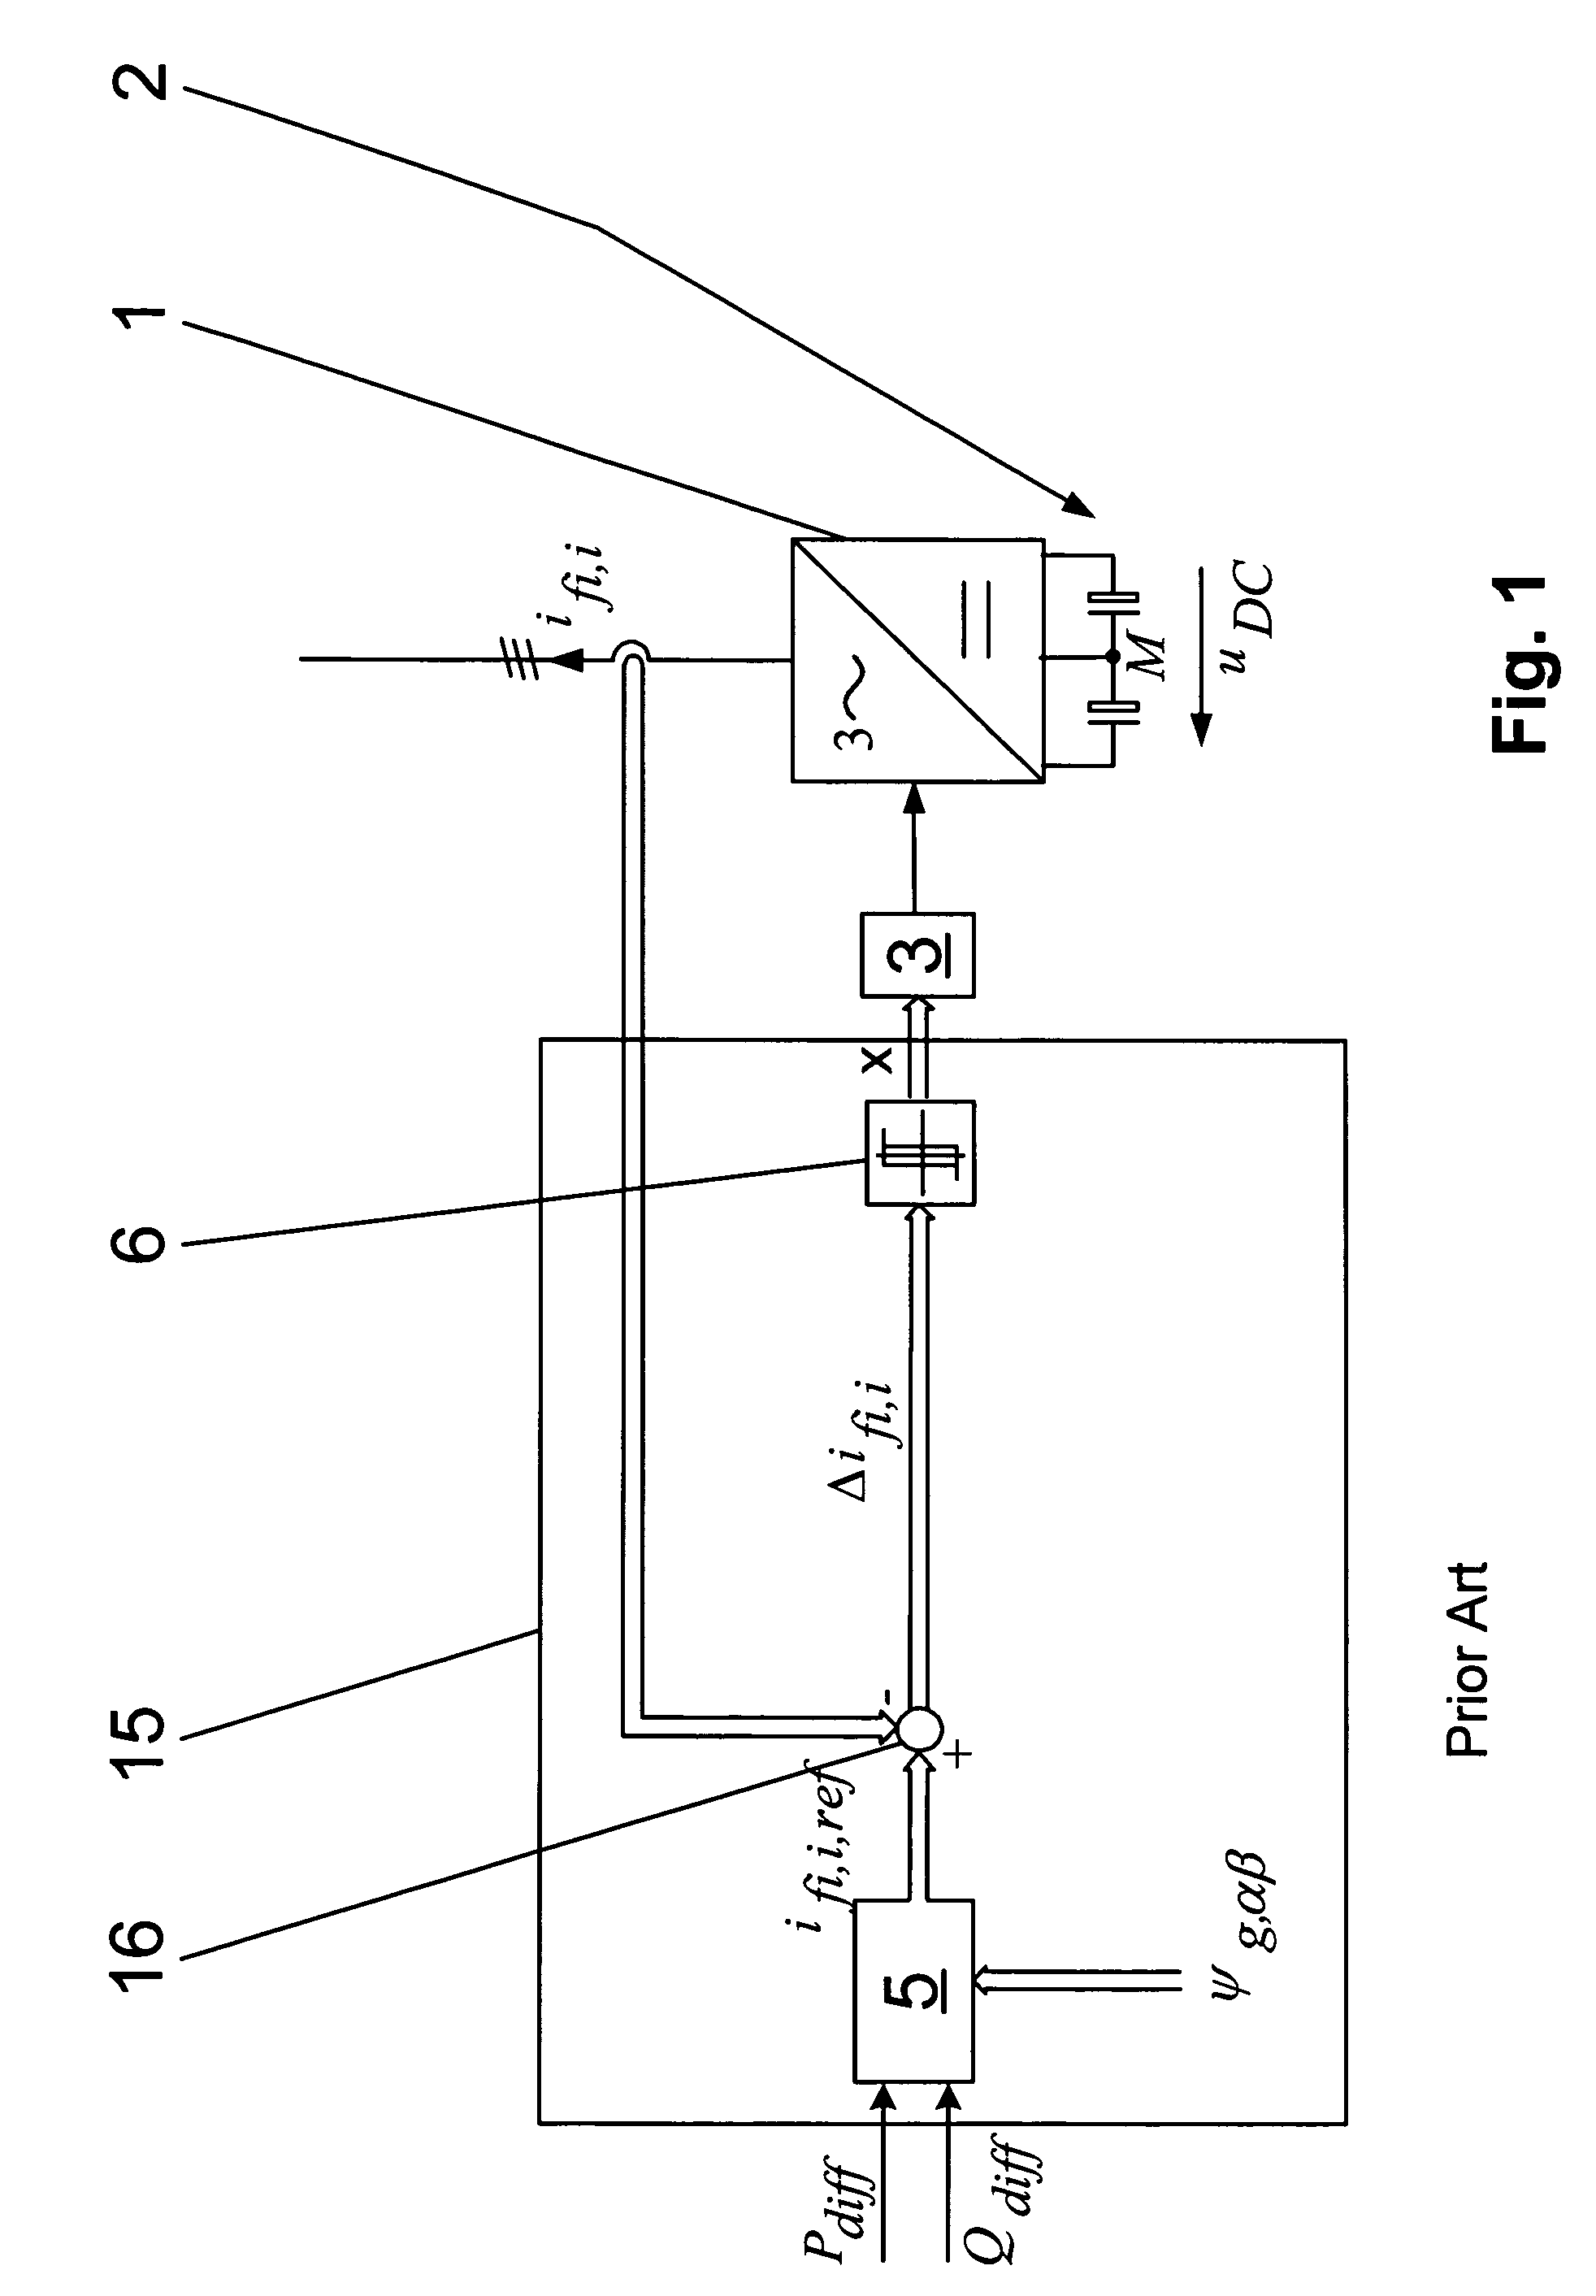 Method for operating a converter circuit, and device for carrying out the method